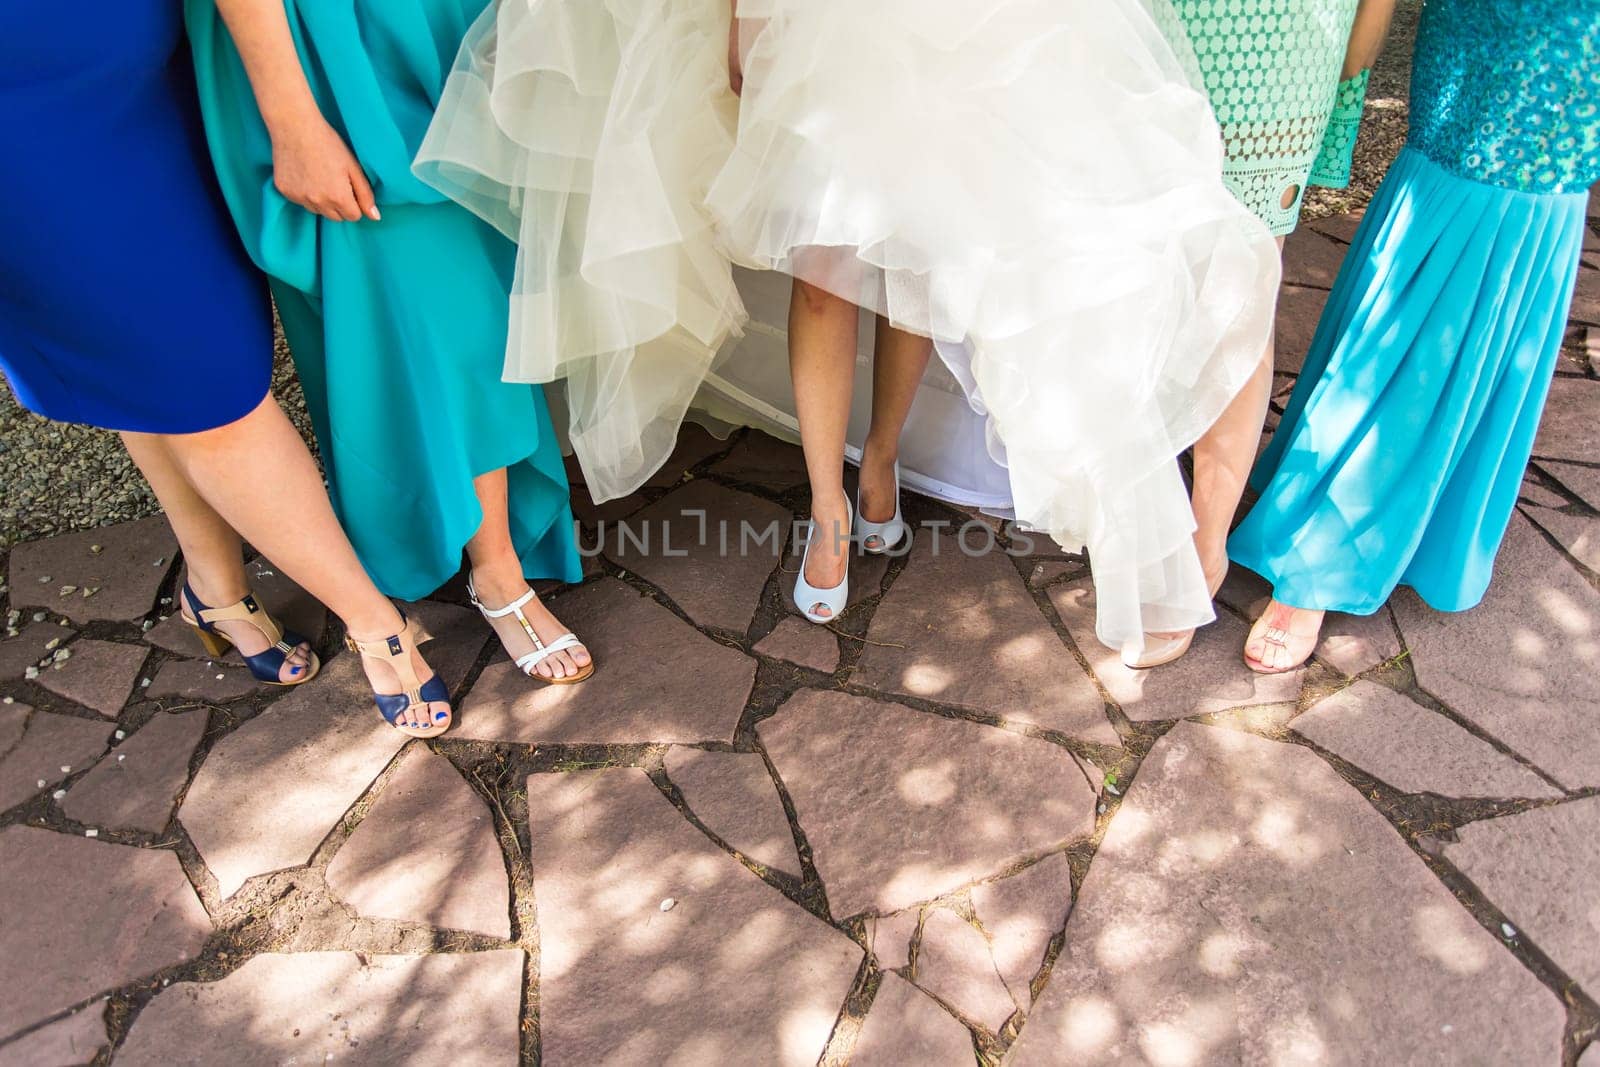 Bride and bridesmaids show off their shoes at wedding. by Satura86